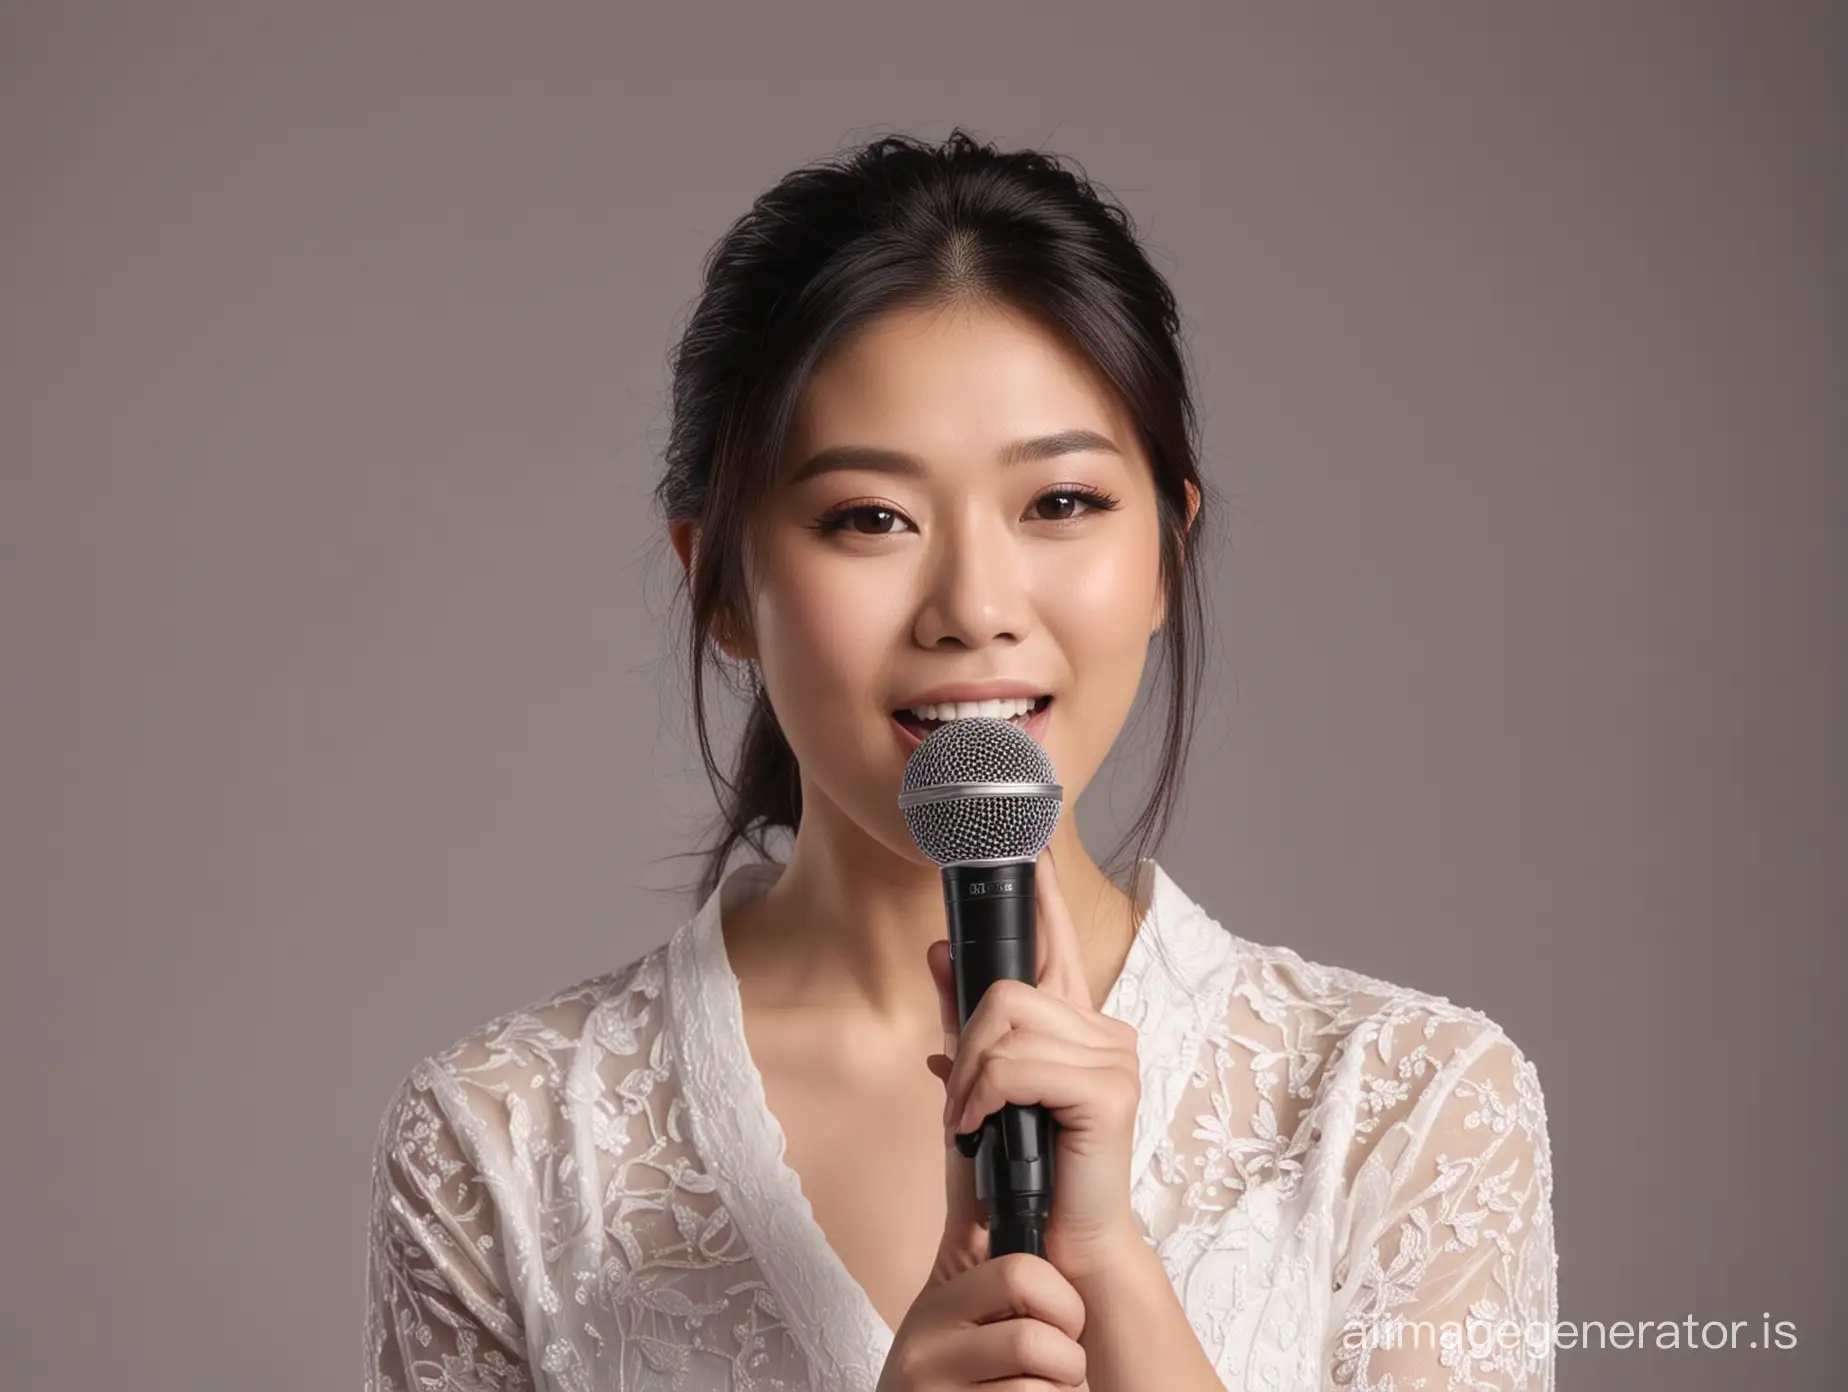 Video of an Asian female singer singing with a microphone held by hand